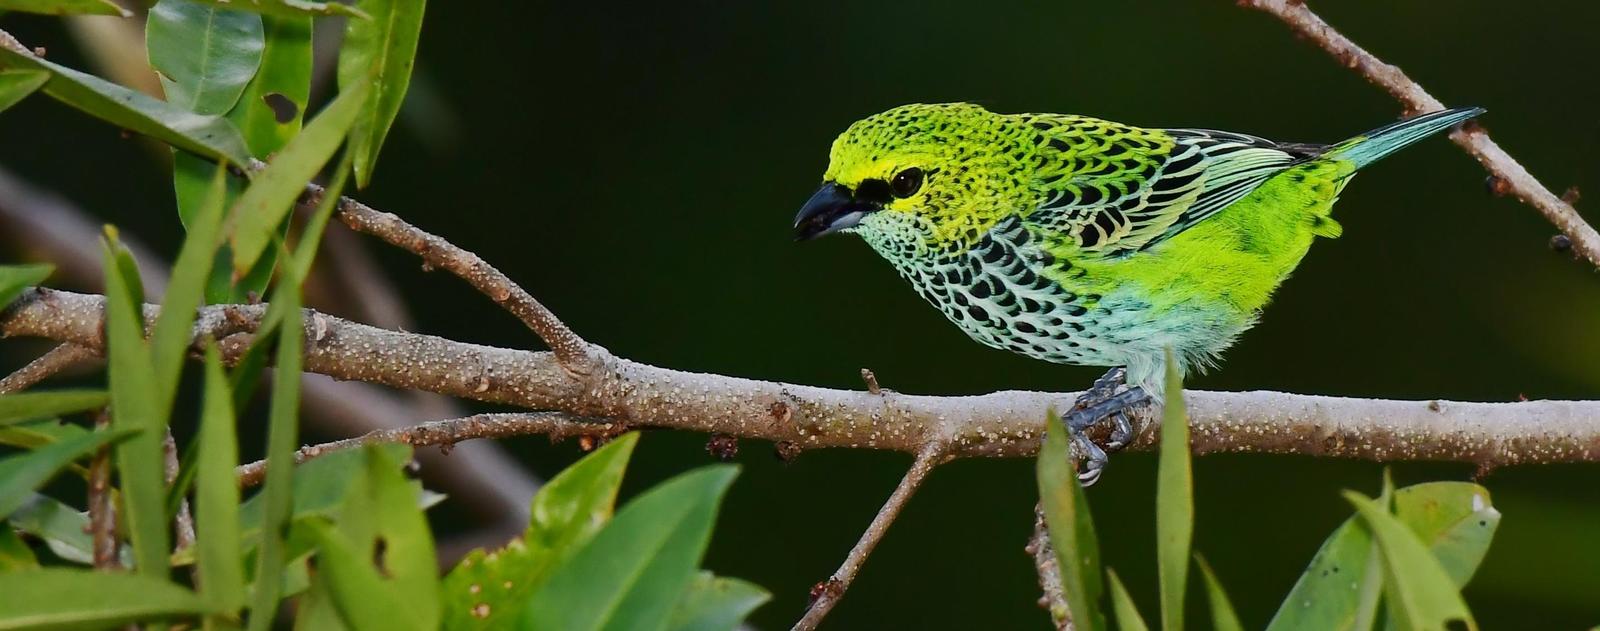 Speckled Tanager Photo by Gareth Rasberry